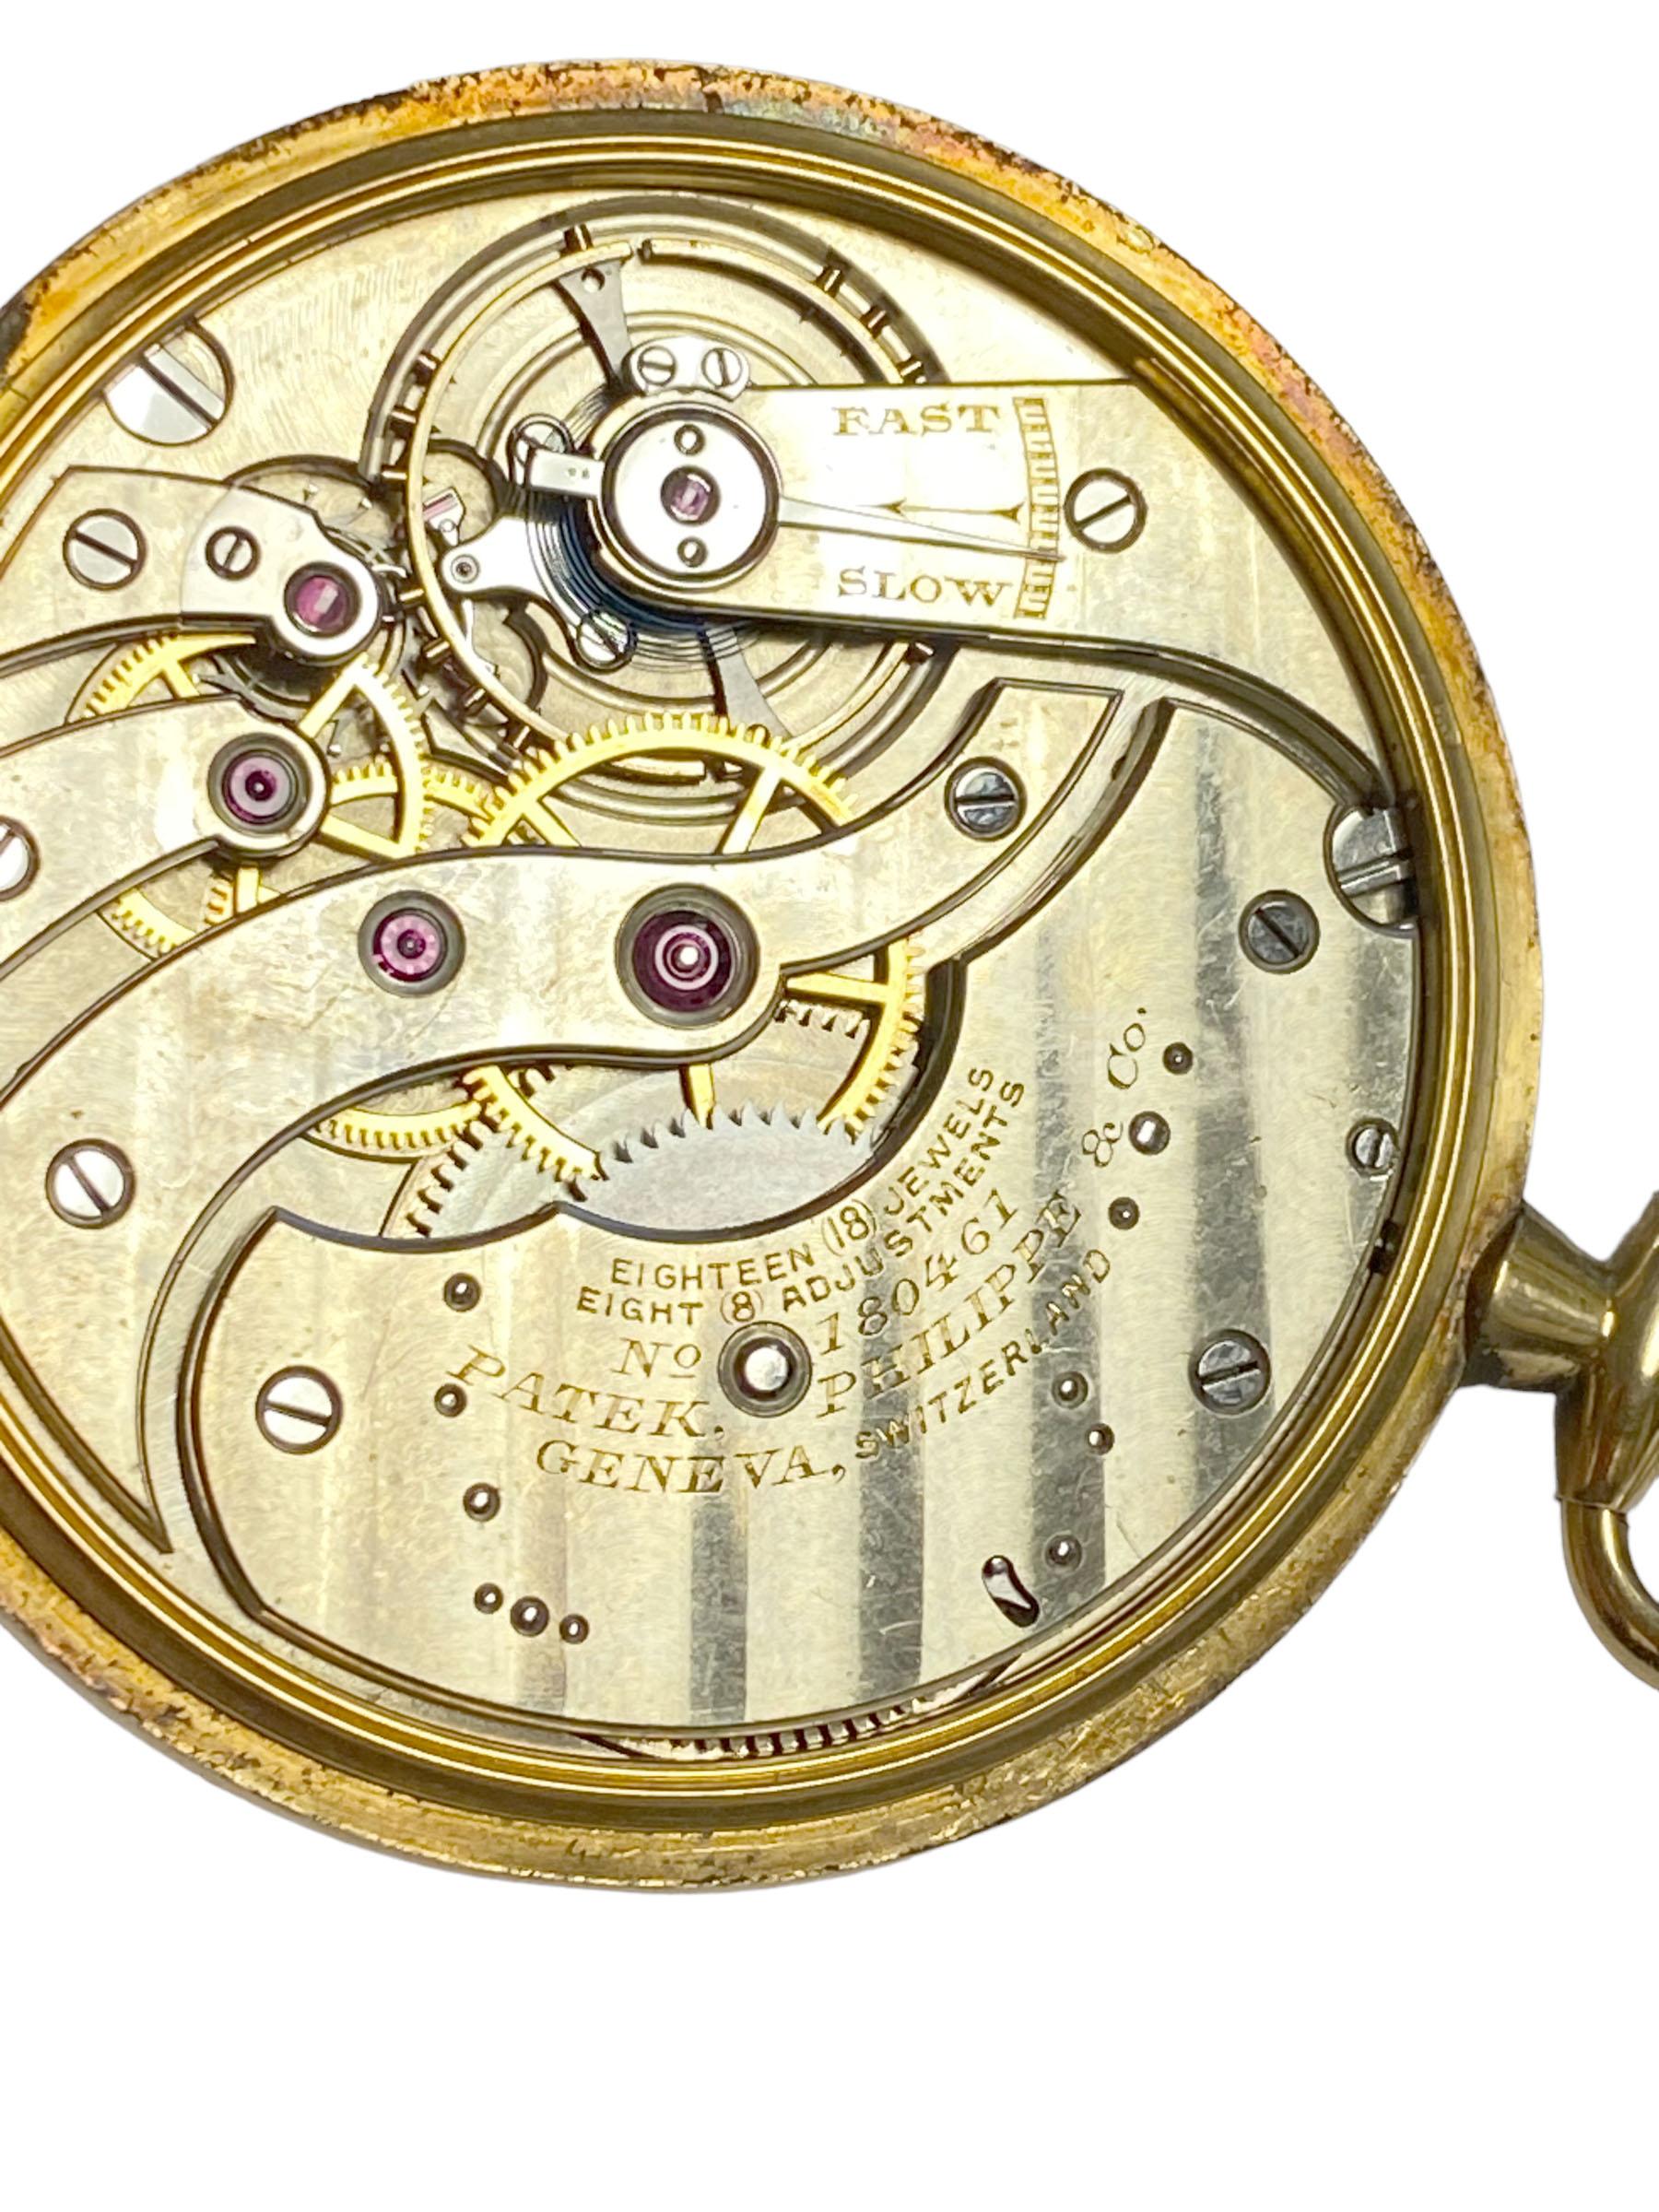 Patek Philippe Yellow Gold 1920s Pocket Watch In Excellent Condition For Sale In Chicago, IL